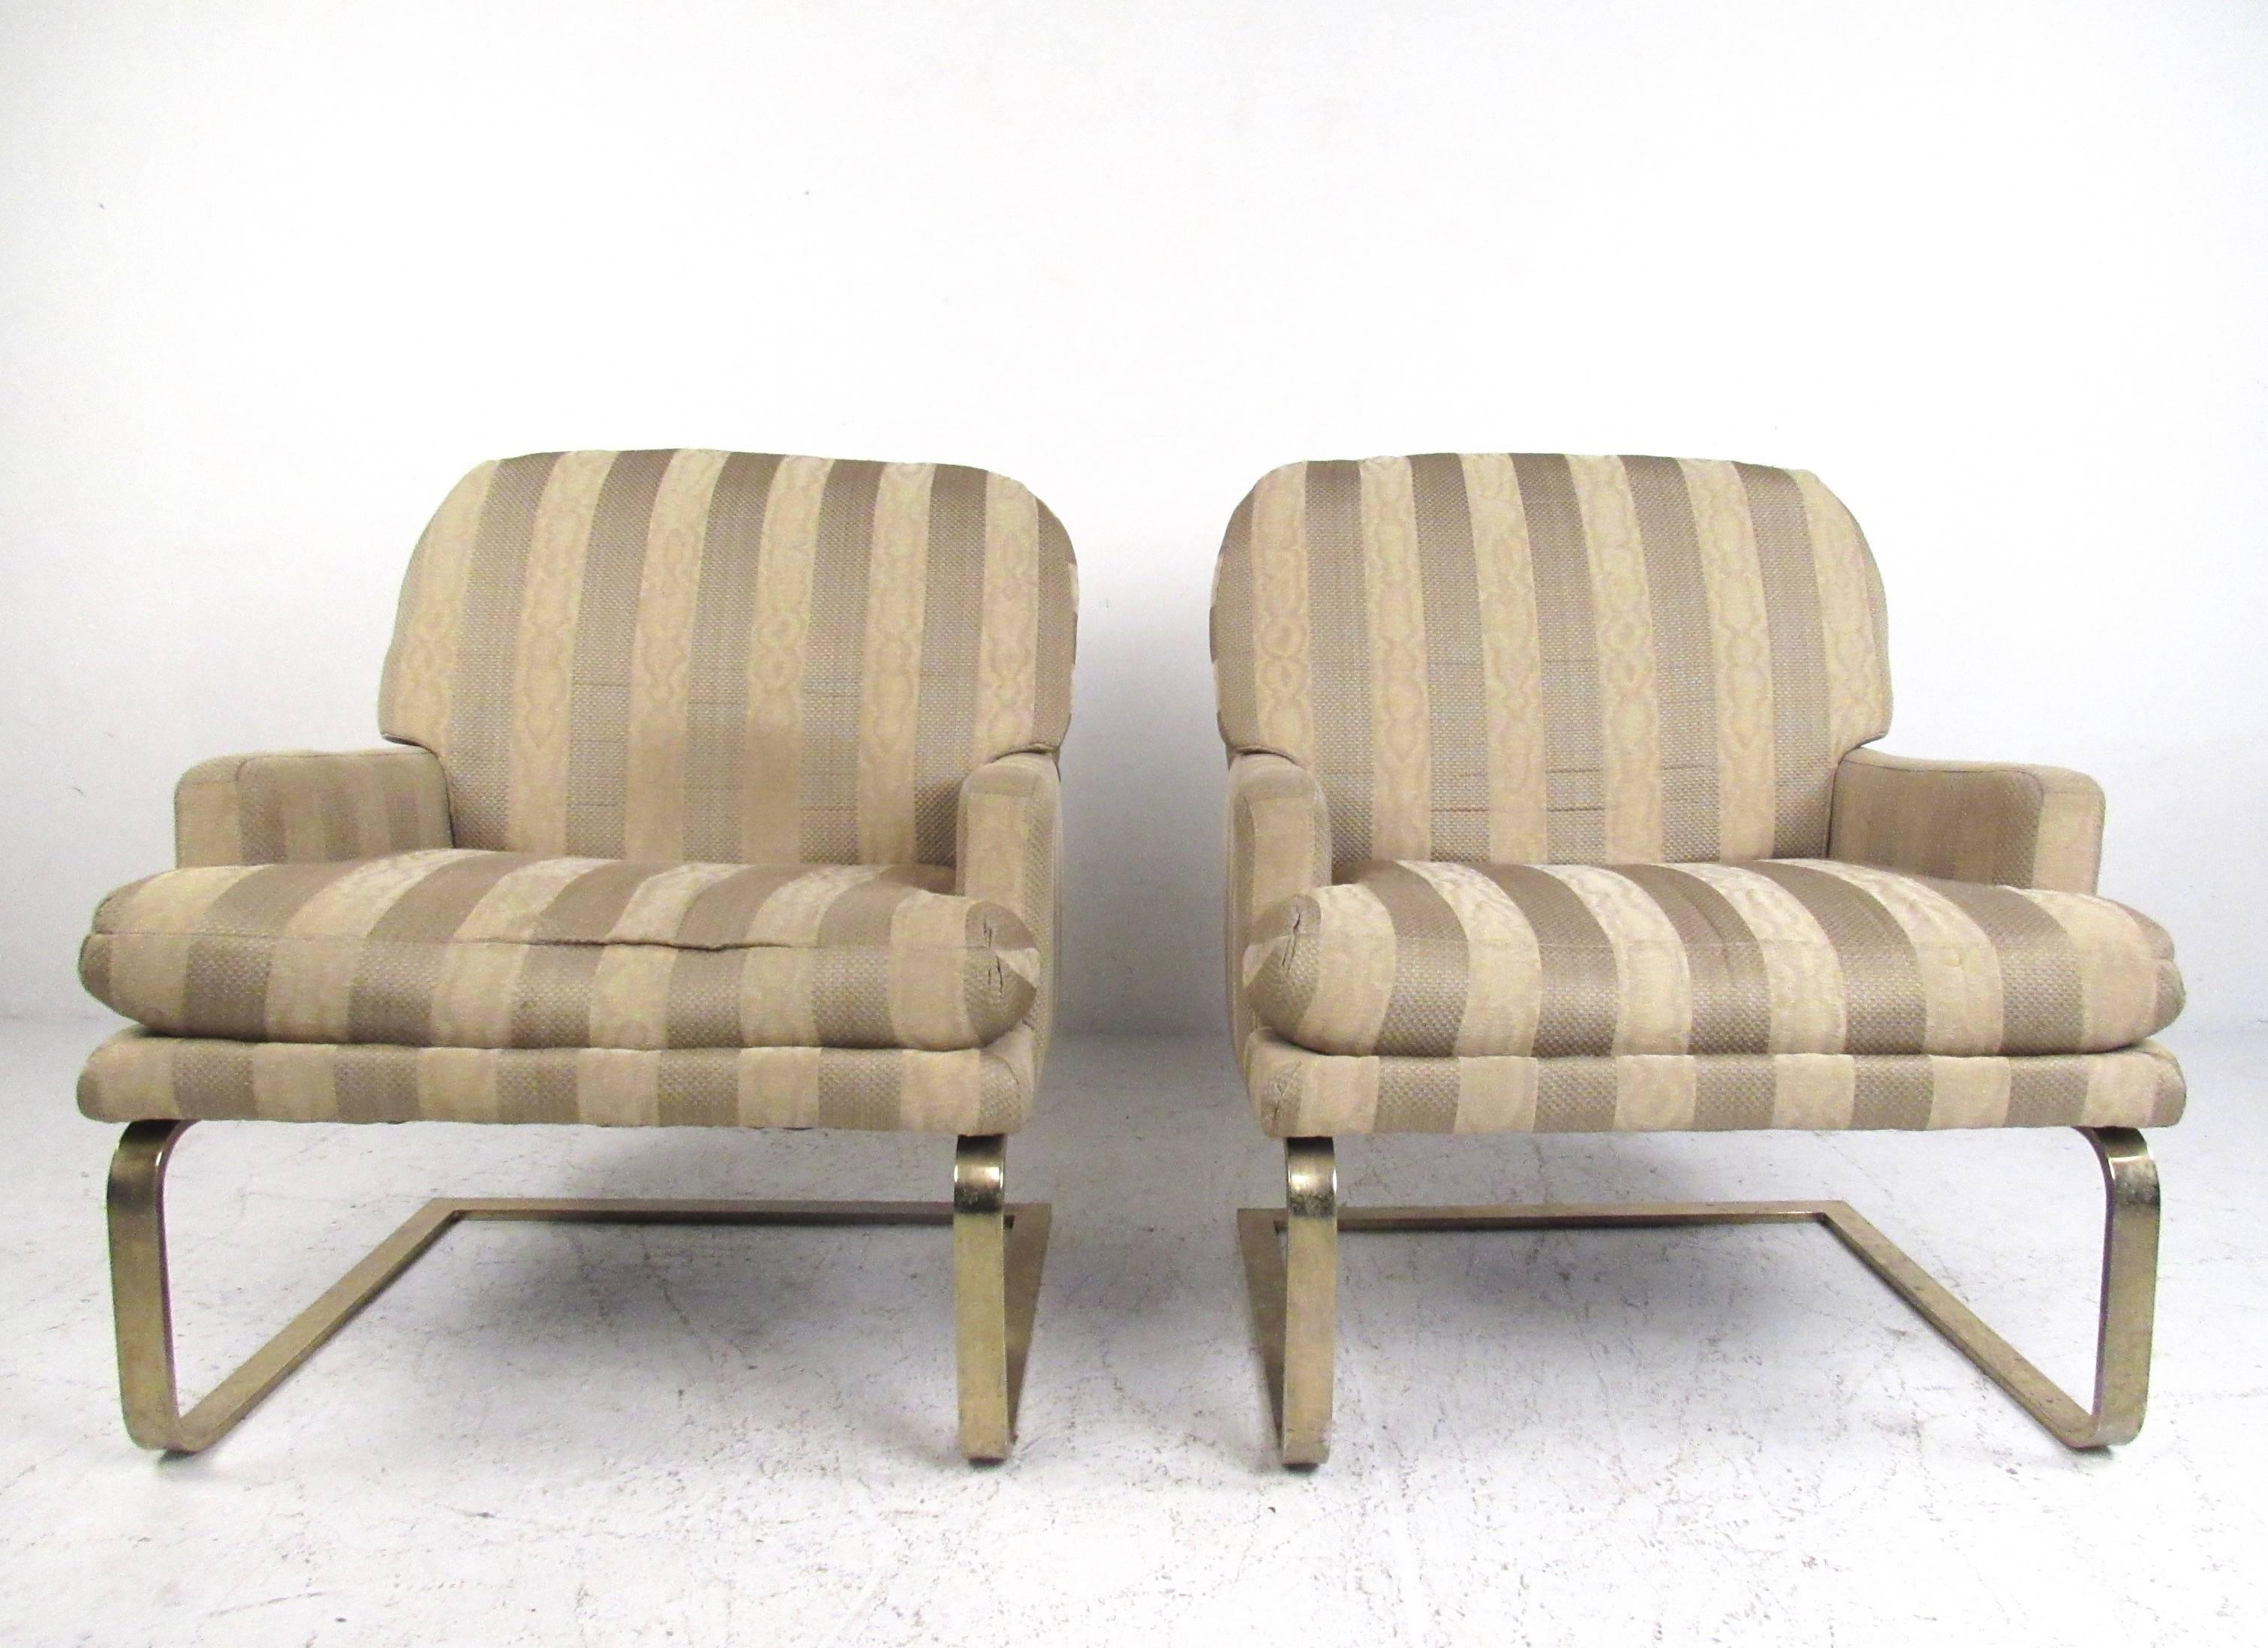 This vintage pair of Selig armchairs features comfortable upholstered seats with plus cushioning and stylish cantilever base. Brass finish metal legs compliment the Mid-Century style of the striped fabric. Manufactured by American furniture maker